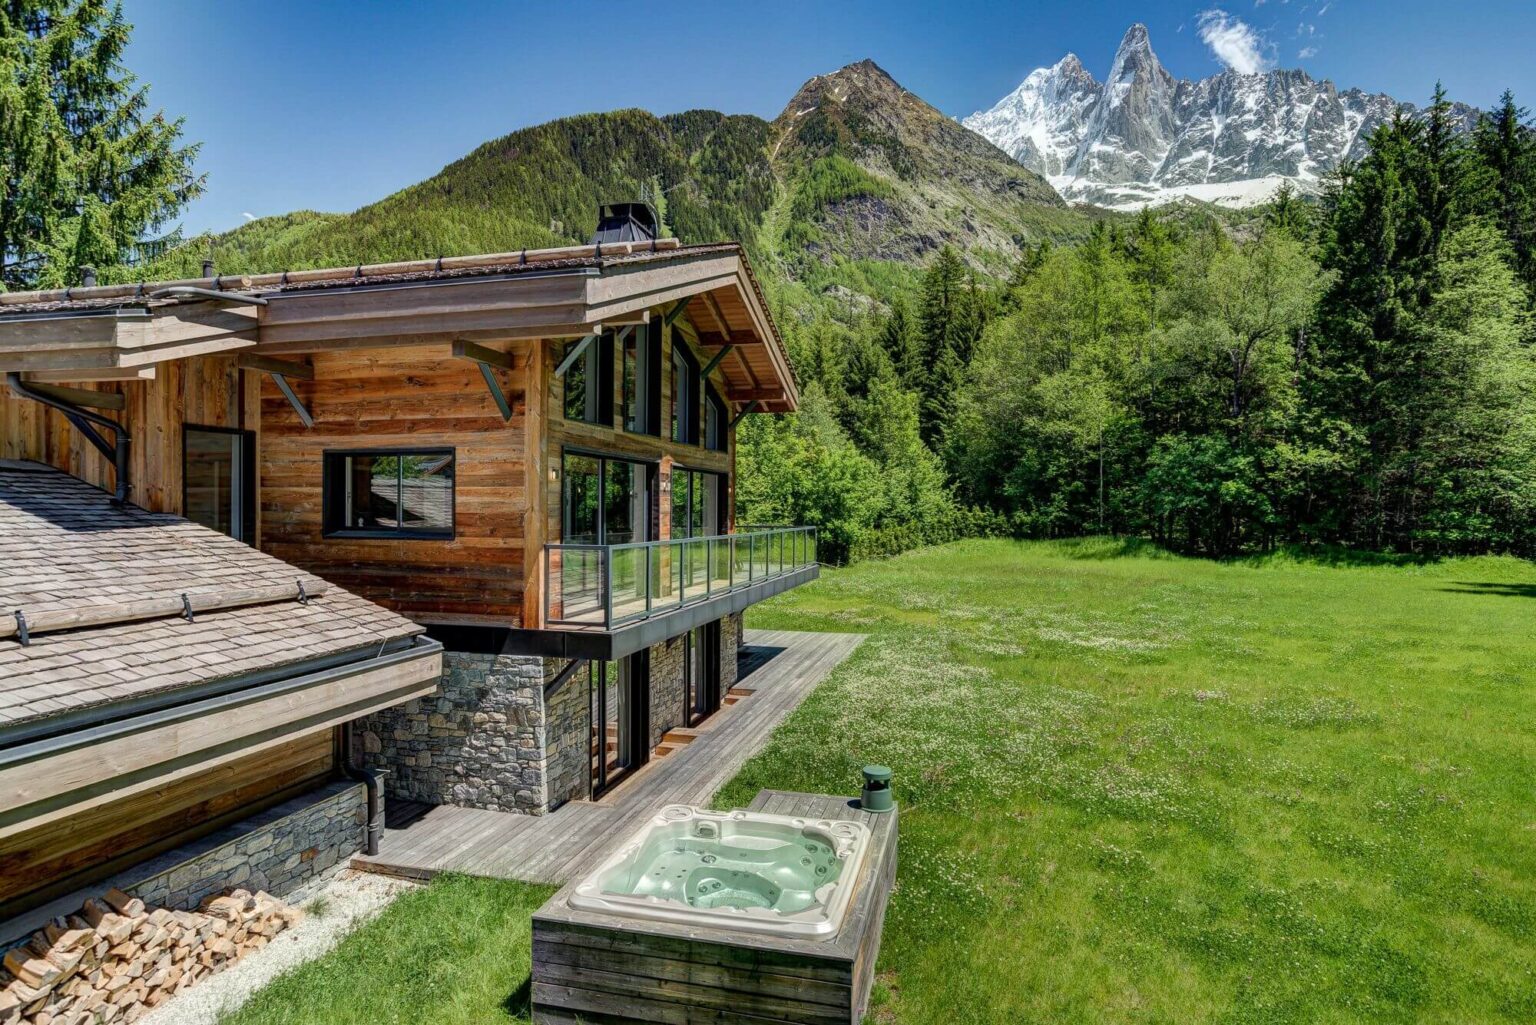 Chalet Elevation|||||||||||||||||||Luxury ski chalets to rent in Chamonix||||||Luxury ski chalets to rent in Chamonix|||||||